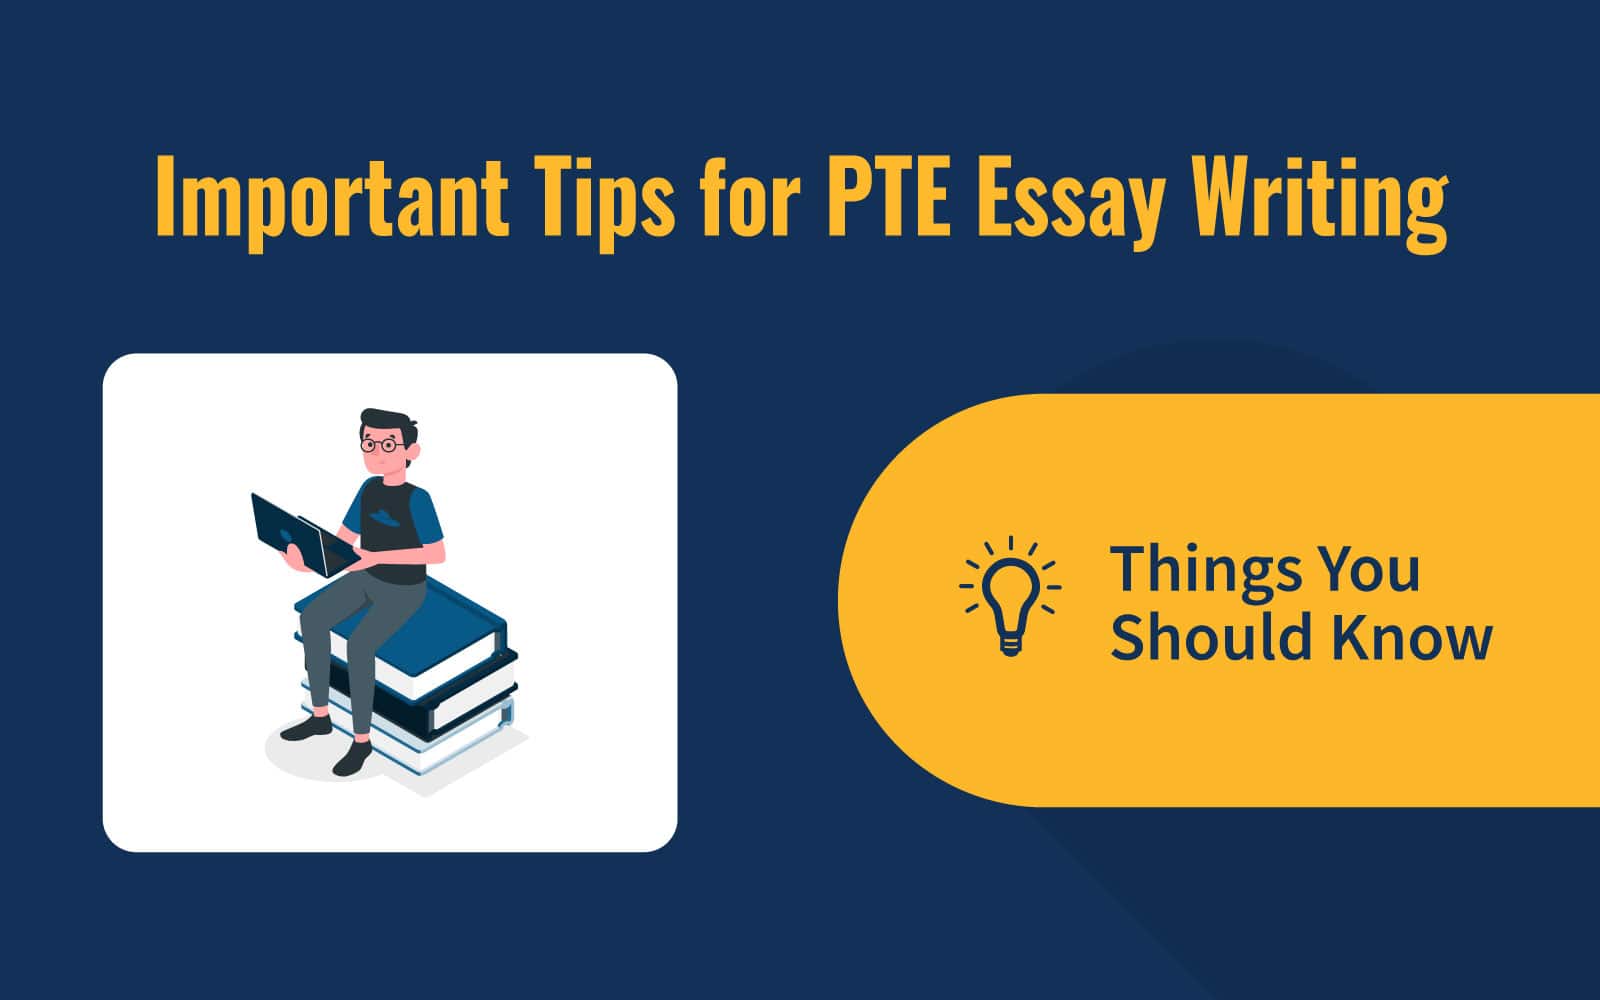 essay writing pte tips